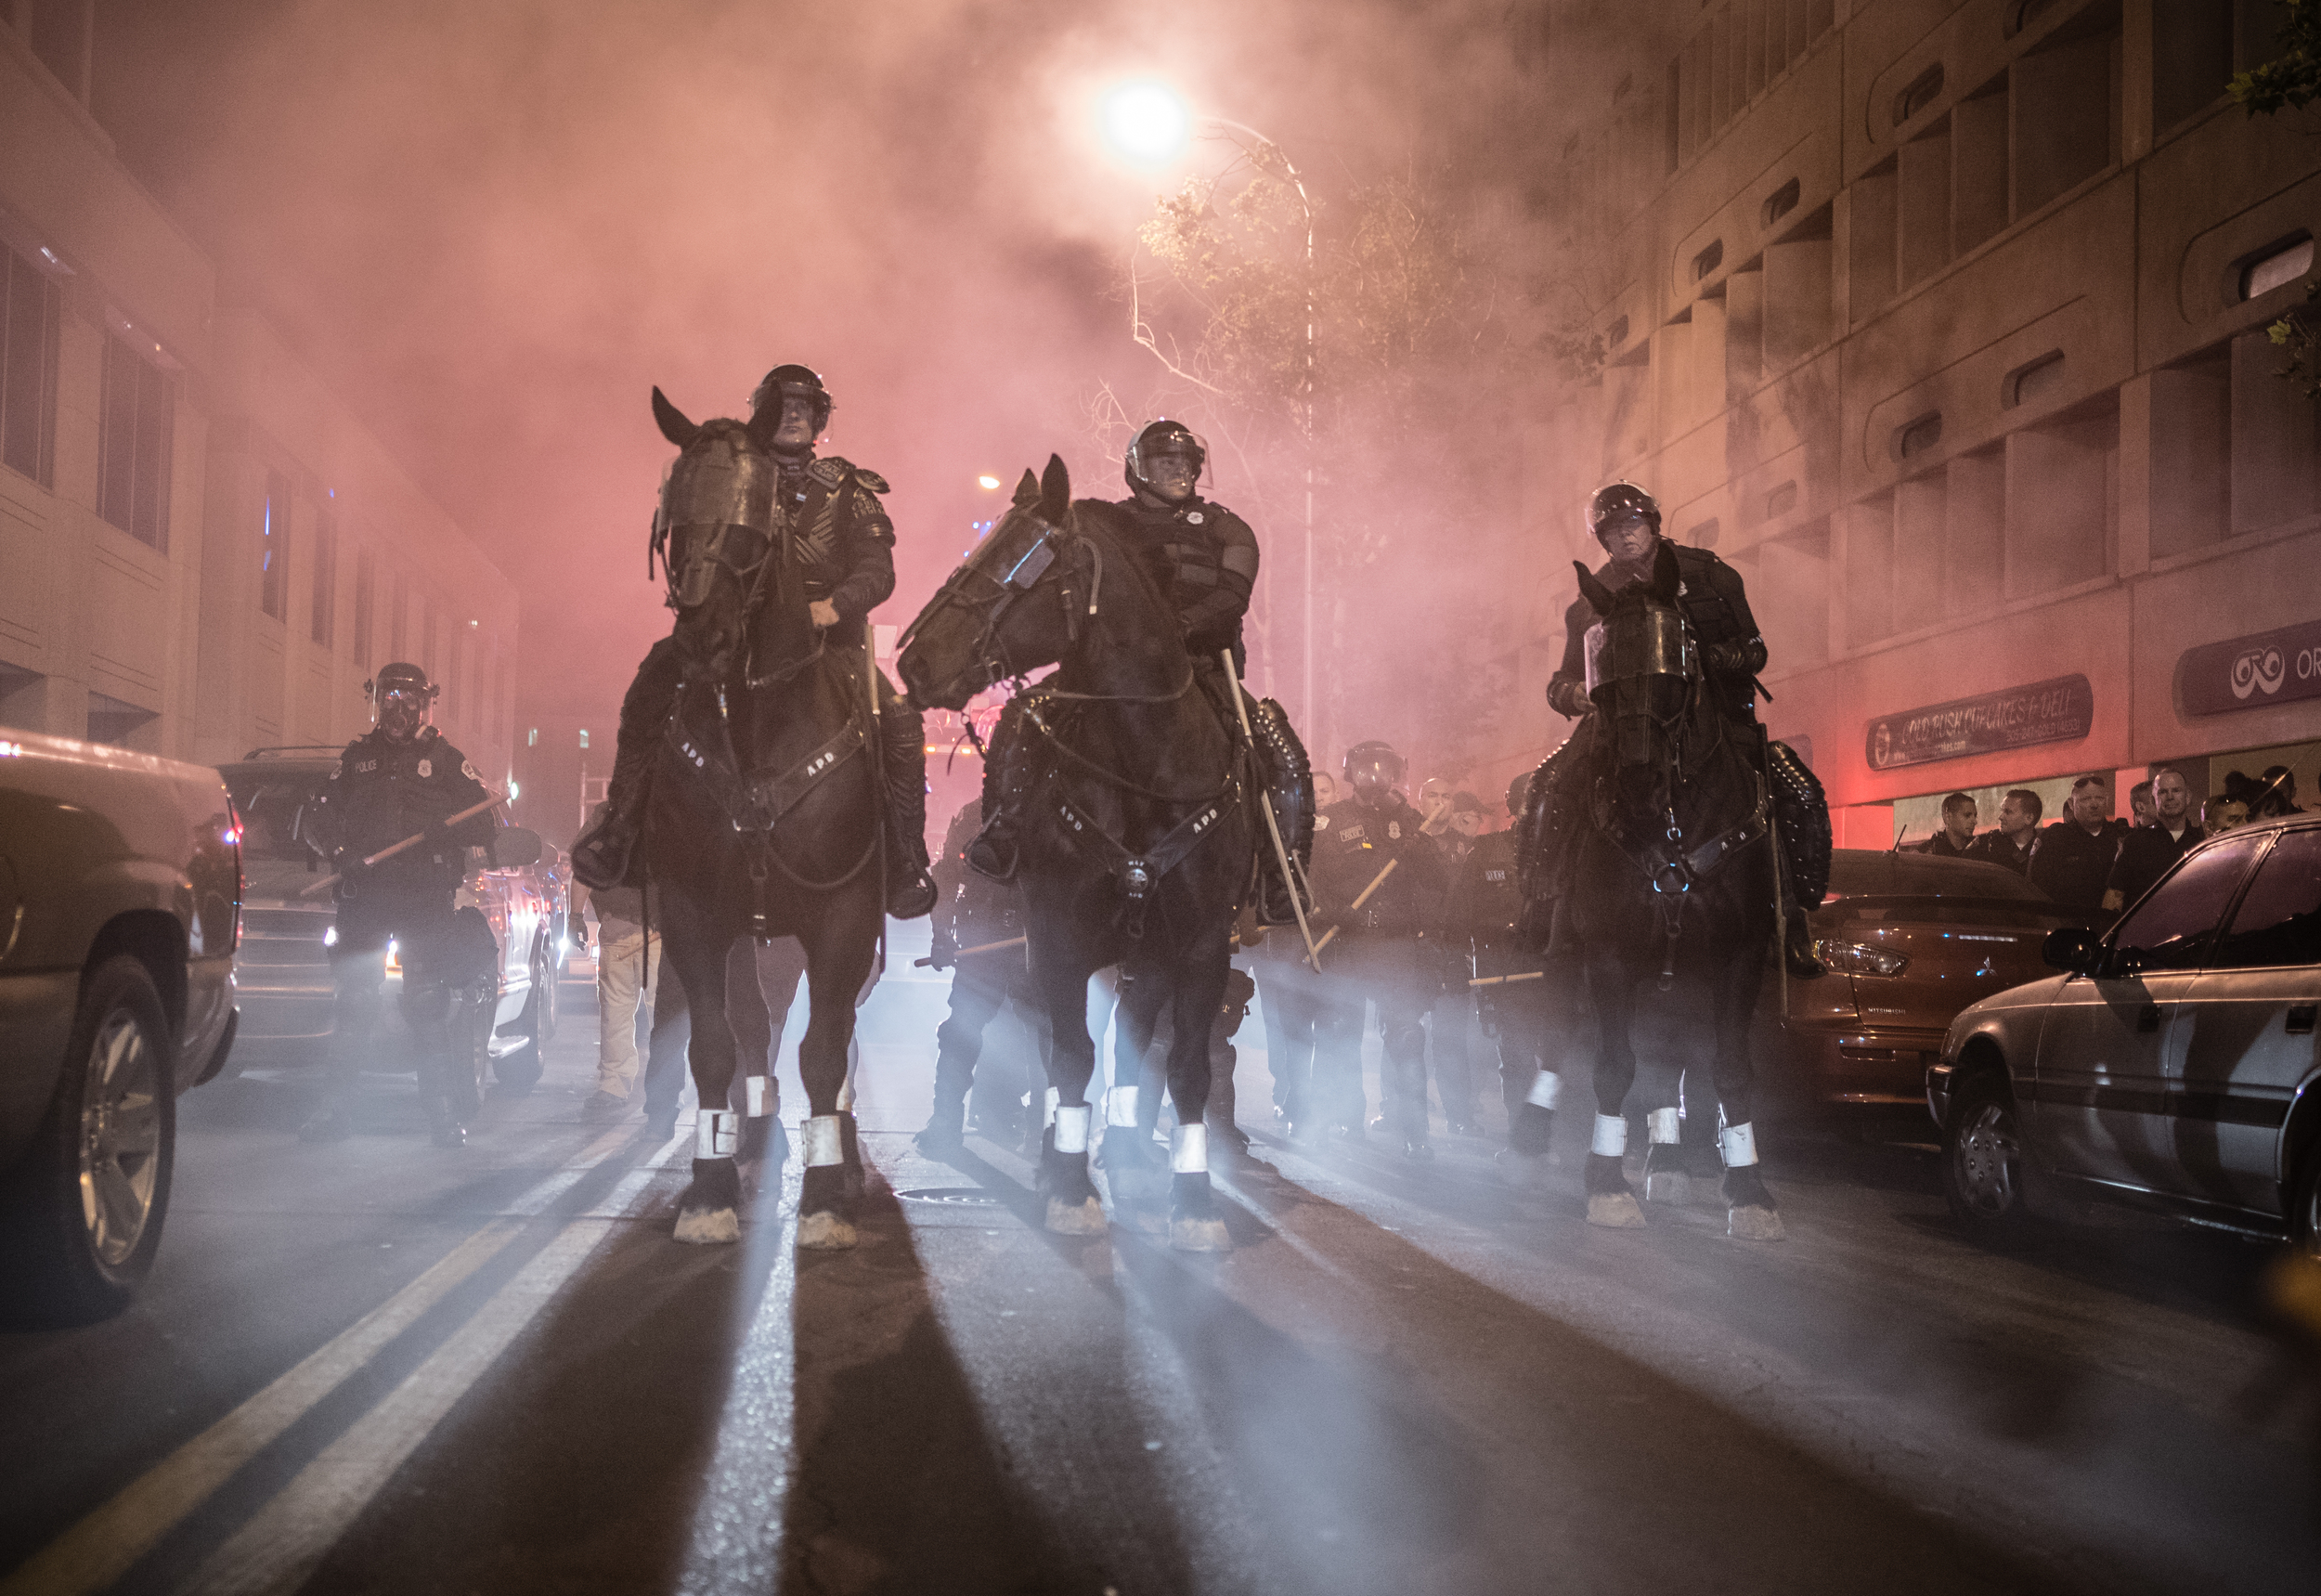 Mounted police get in position to remove protesters in Albuquerque.